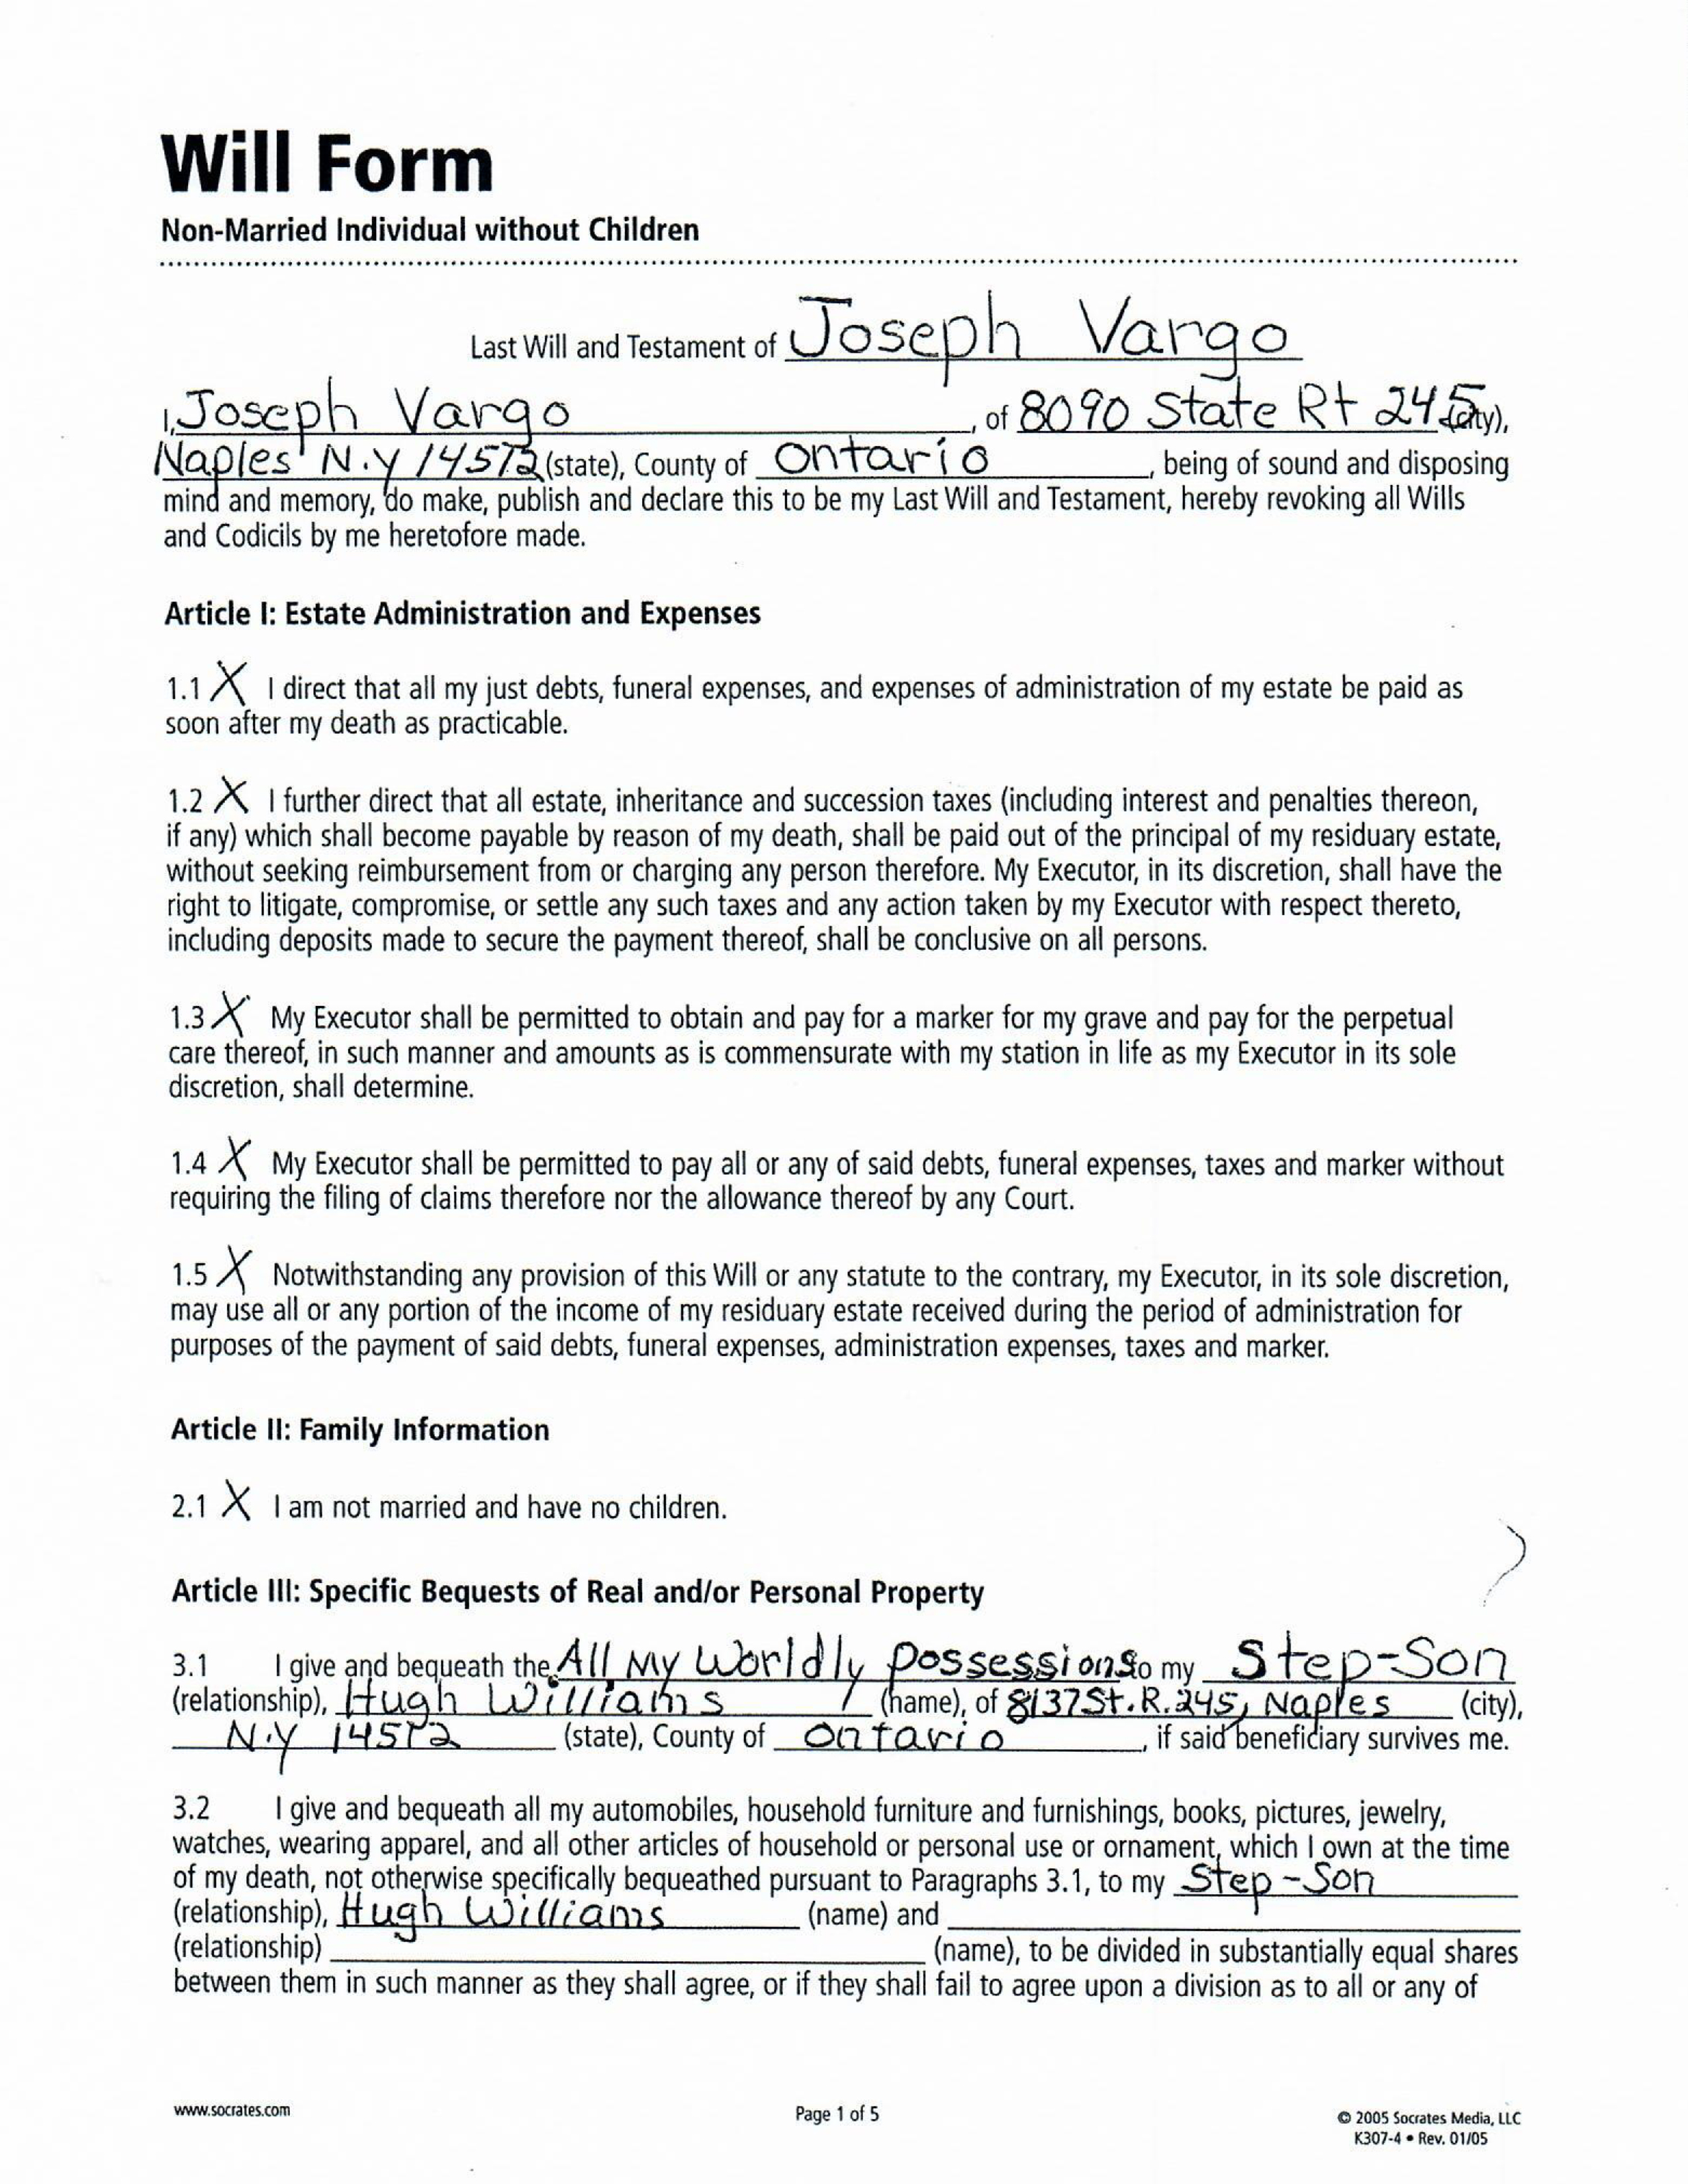 Court Citation/Will Page 2